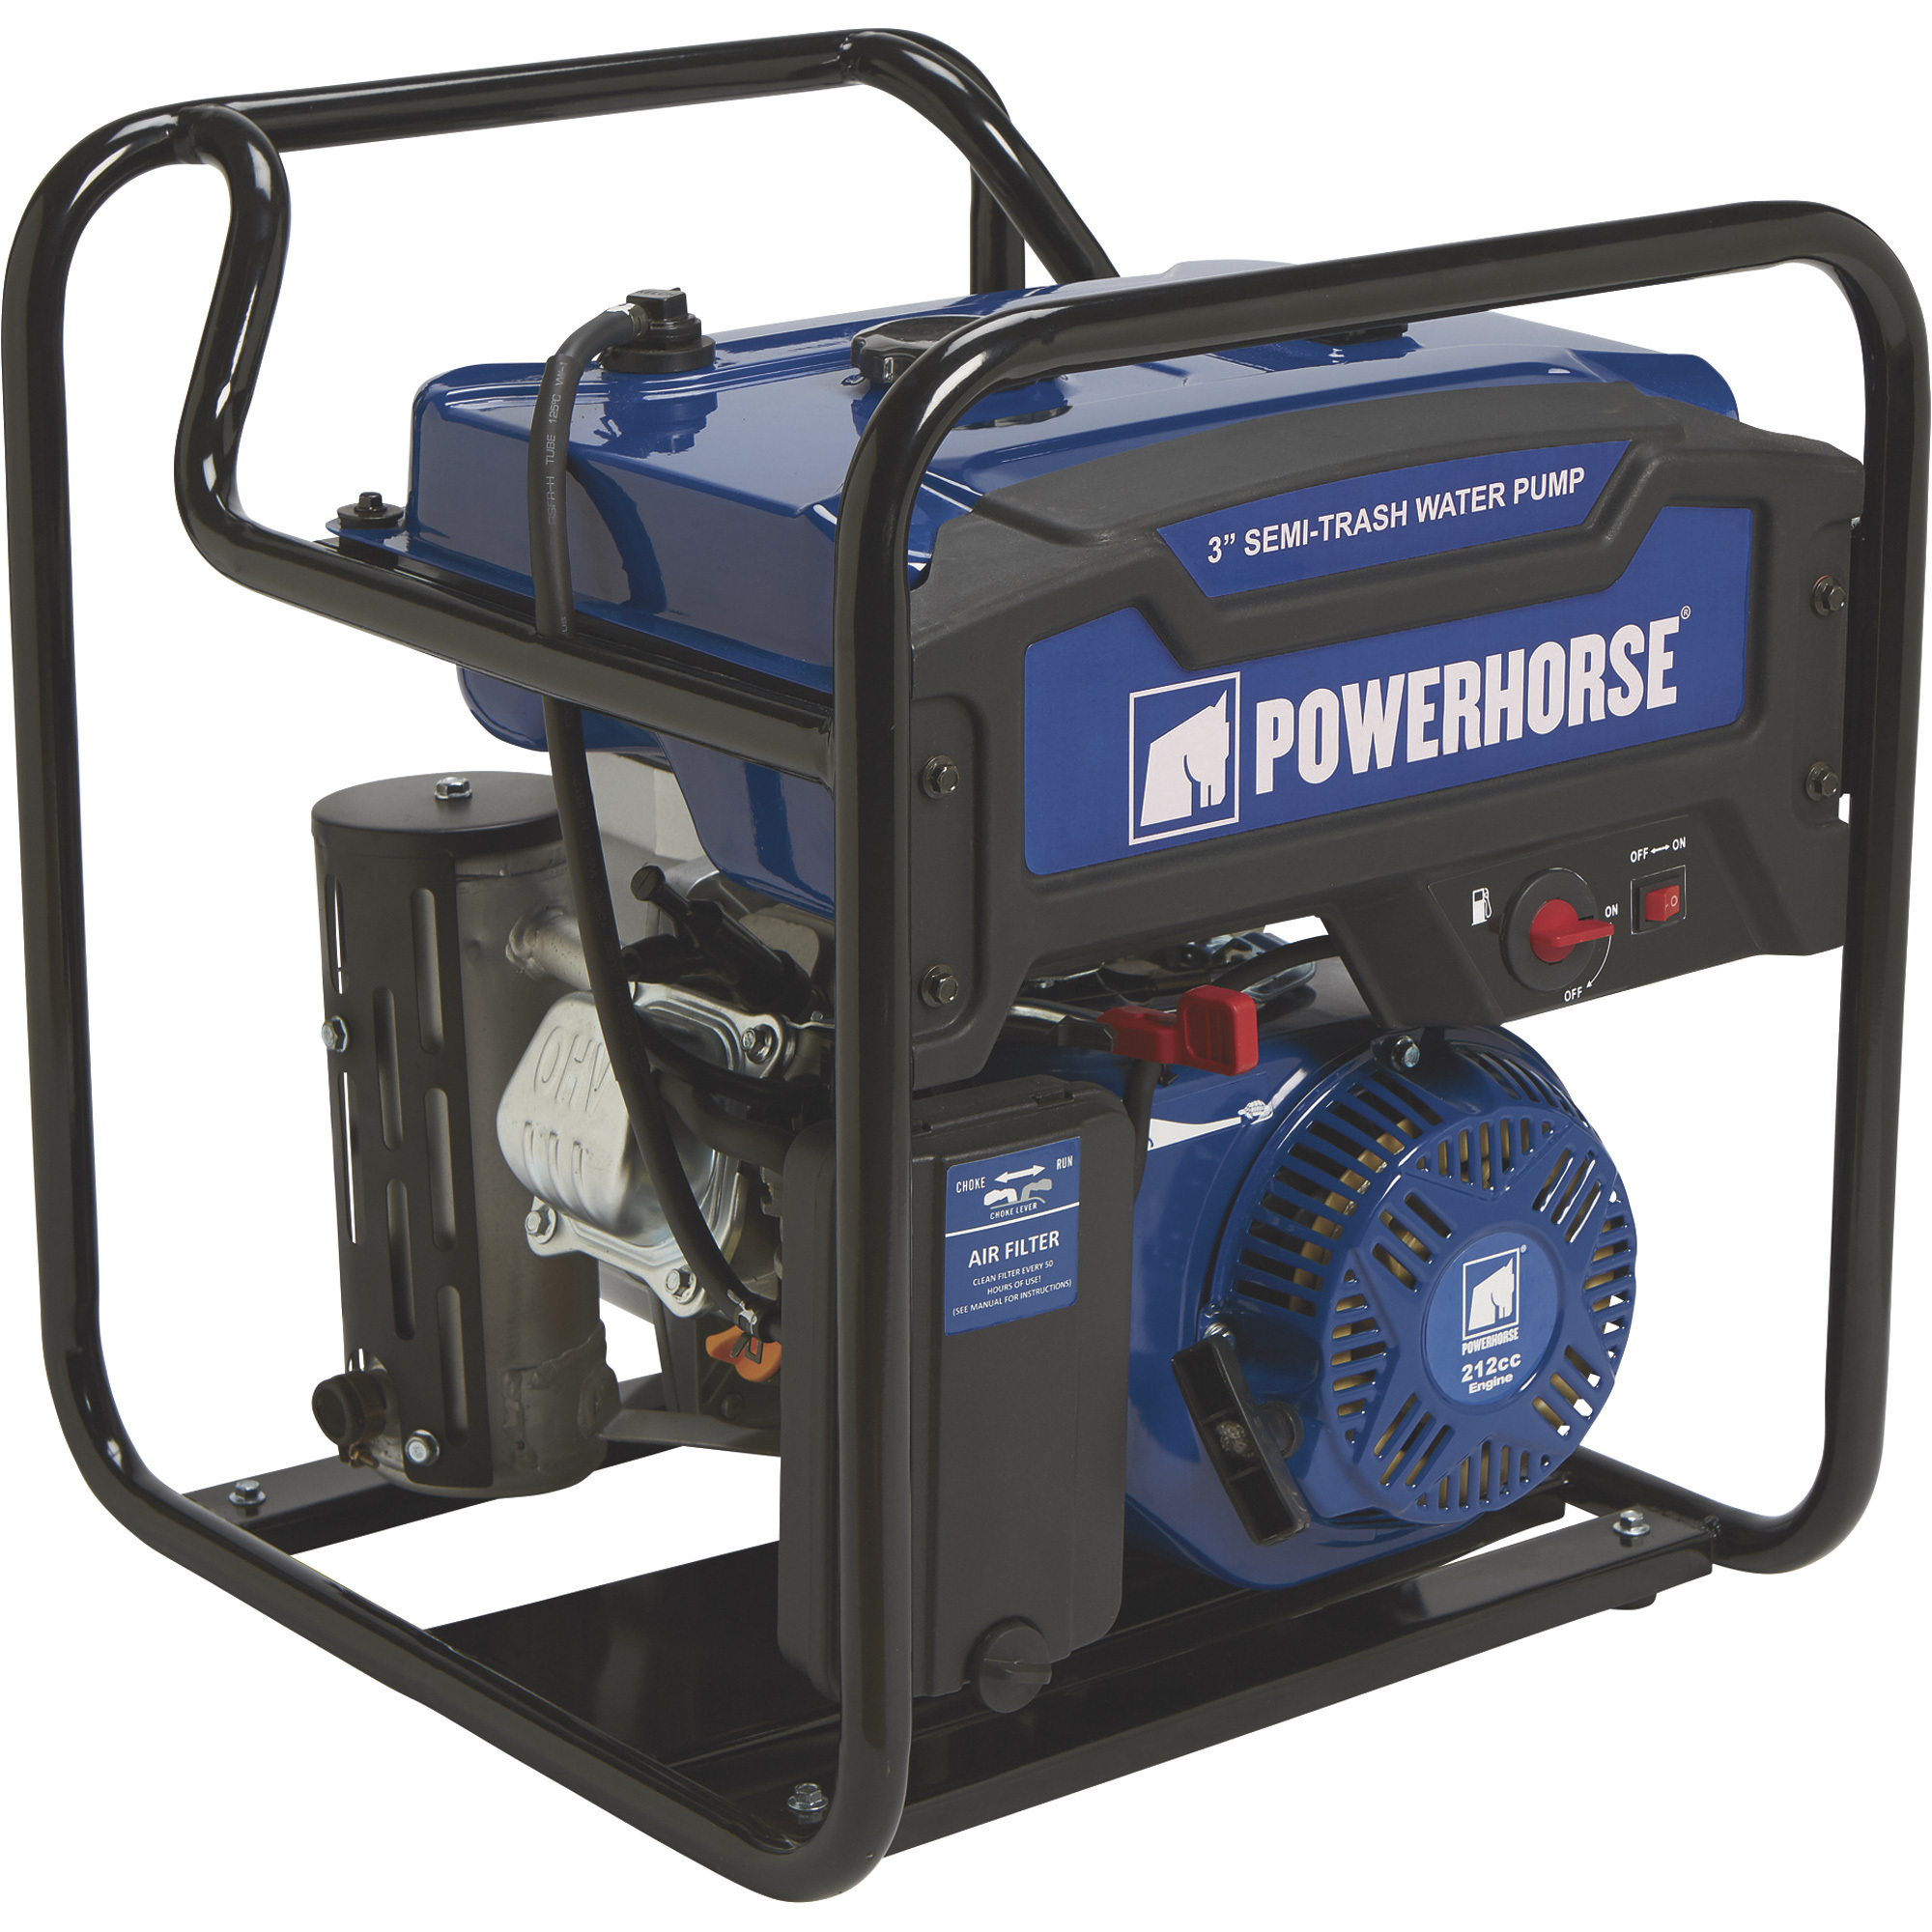 Powerhorse Extended Run Semi-Trash Water Pump, 3in. Ports, 14,160 GPH,  5/8in. Solids Capacity, 212cc OHV Engine, Model# DS30